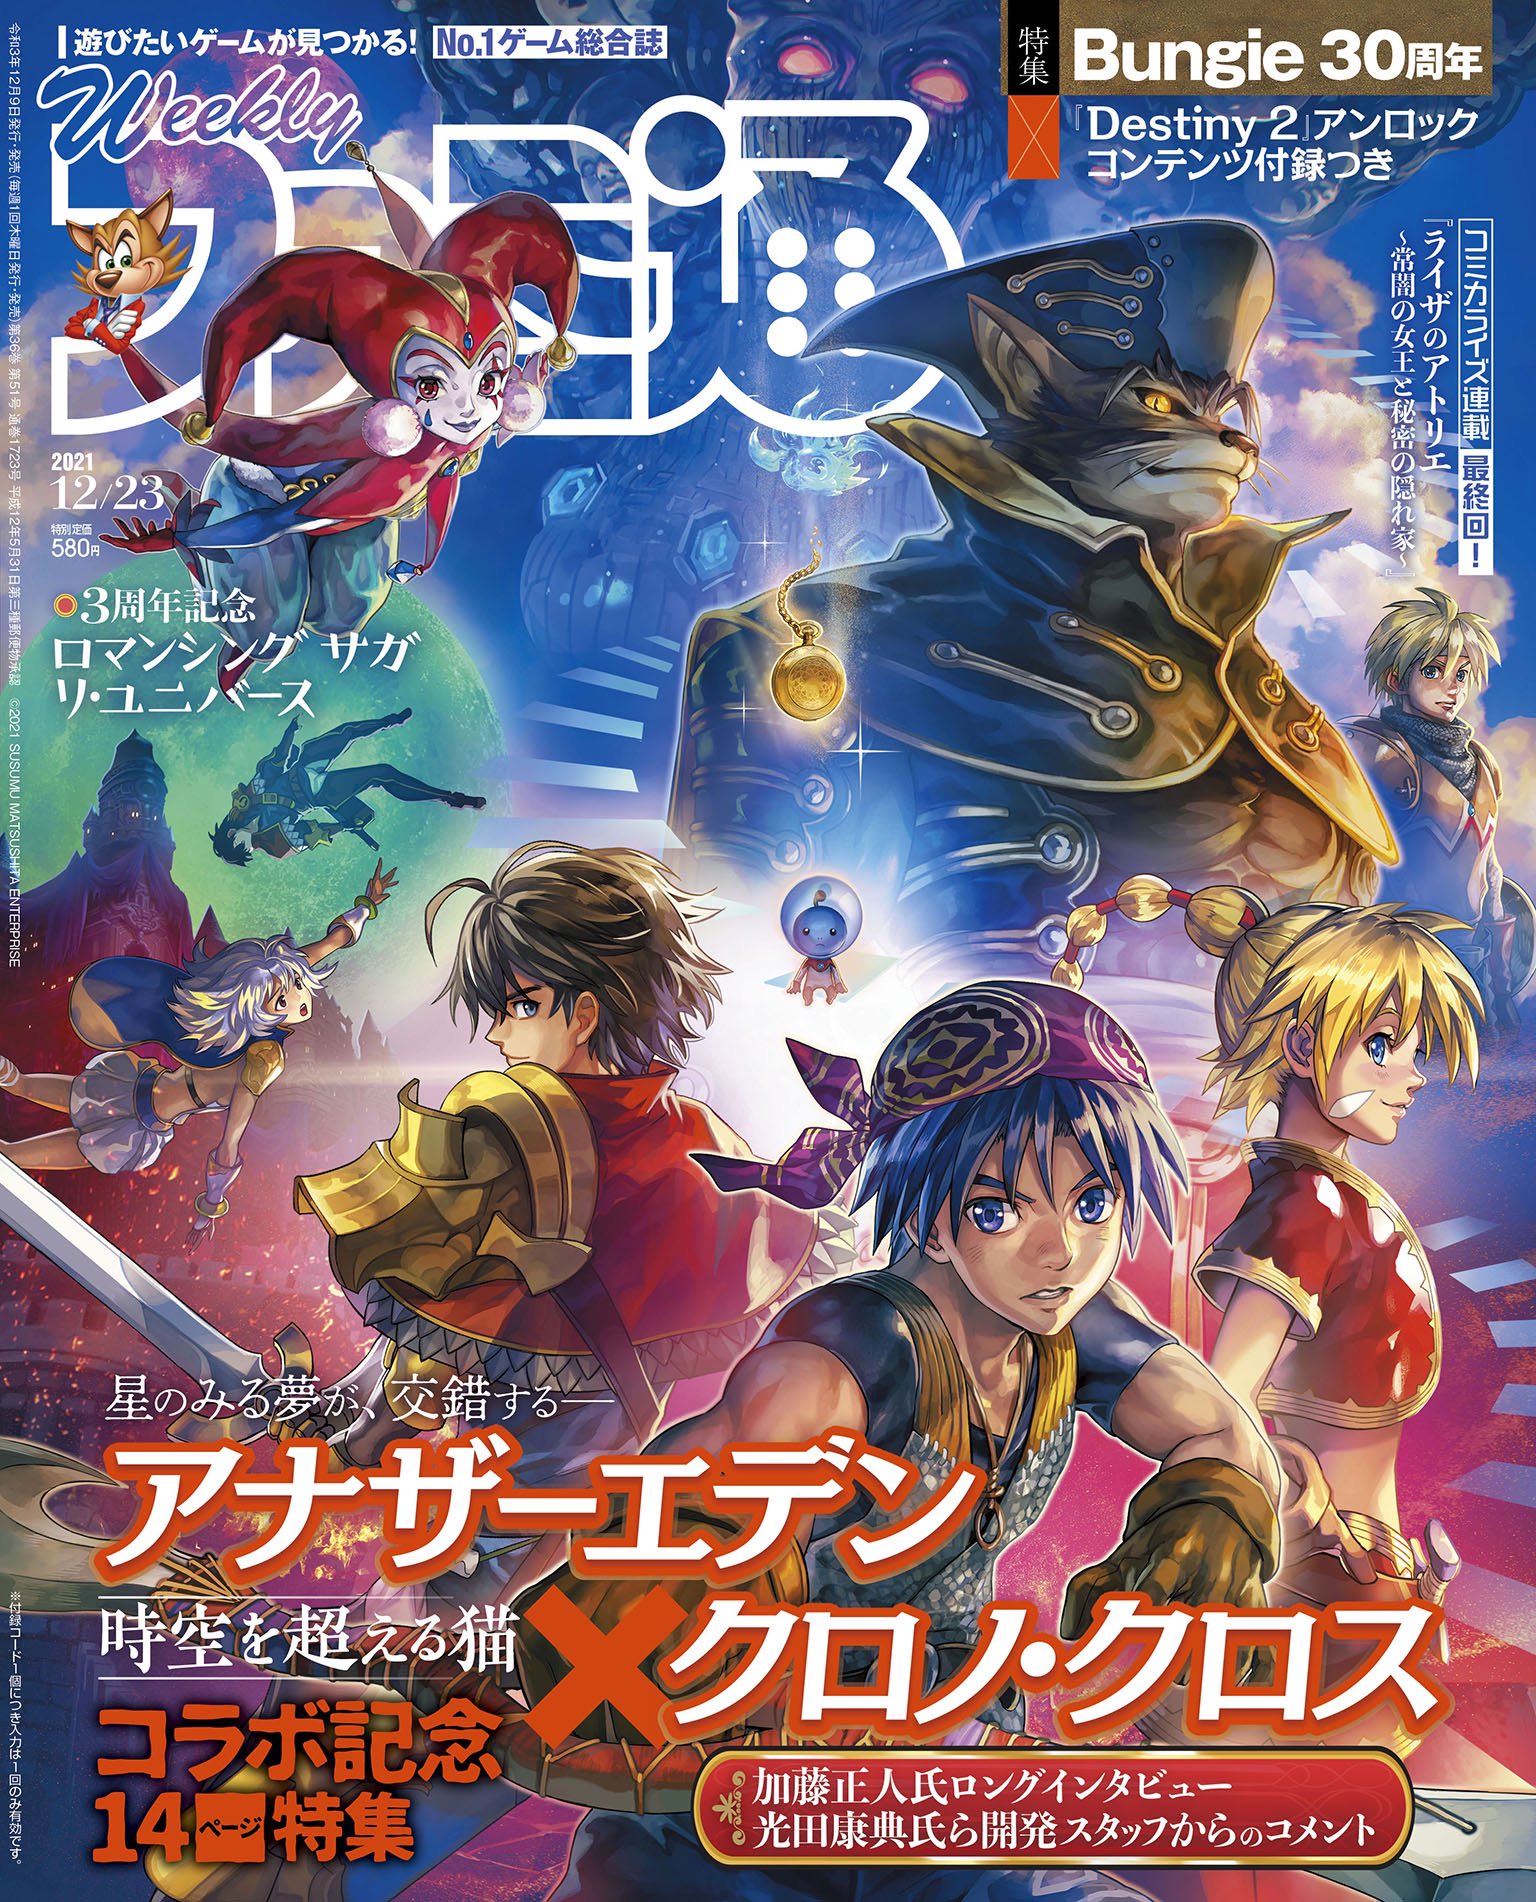 Famitsu December 23rd cover with Another Eden x Chrono Cross